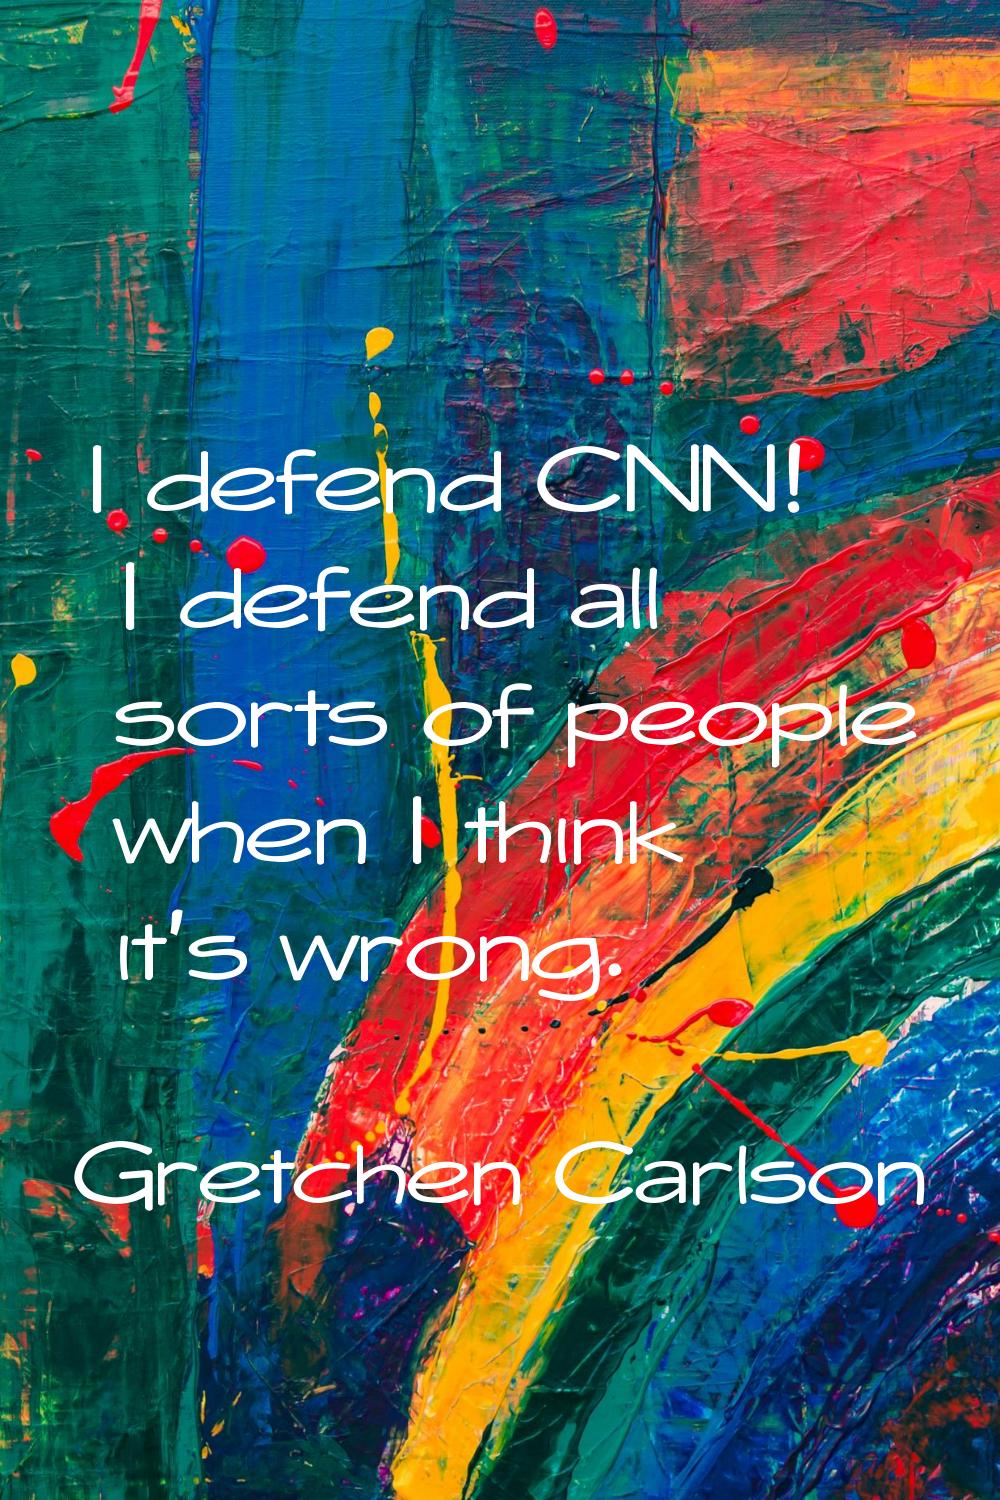 I defend CNN! I defend all sorts of people when I think it's wrong.